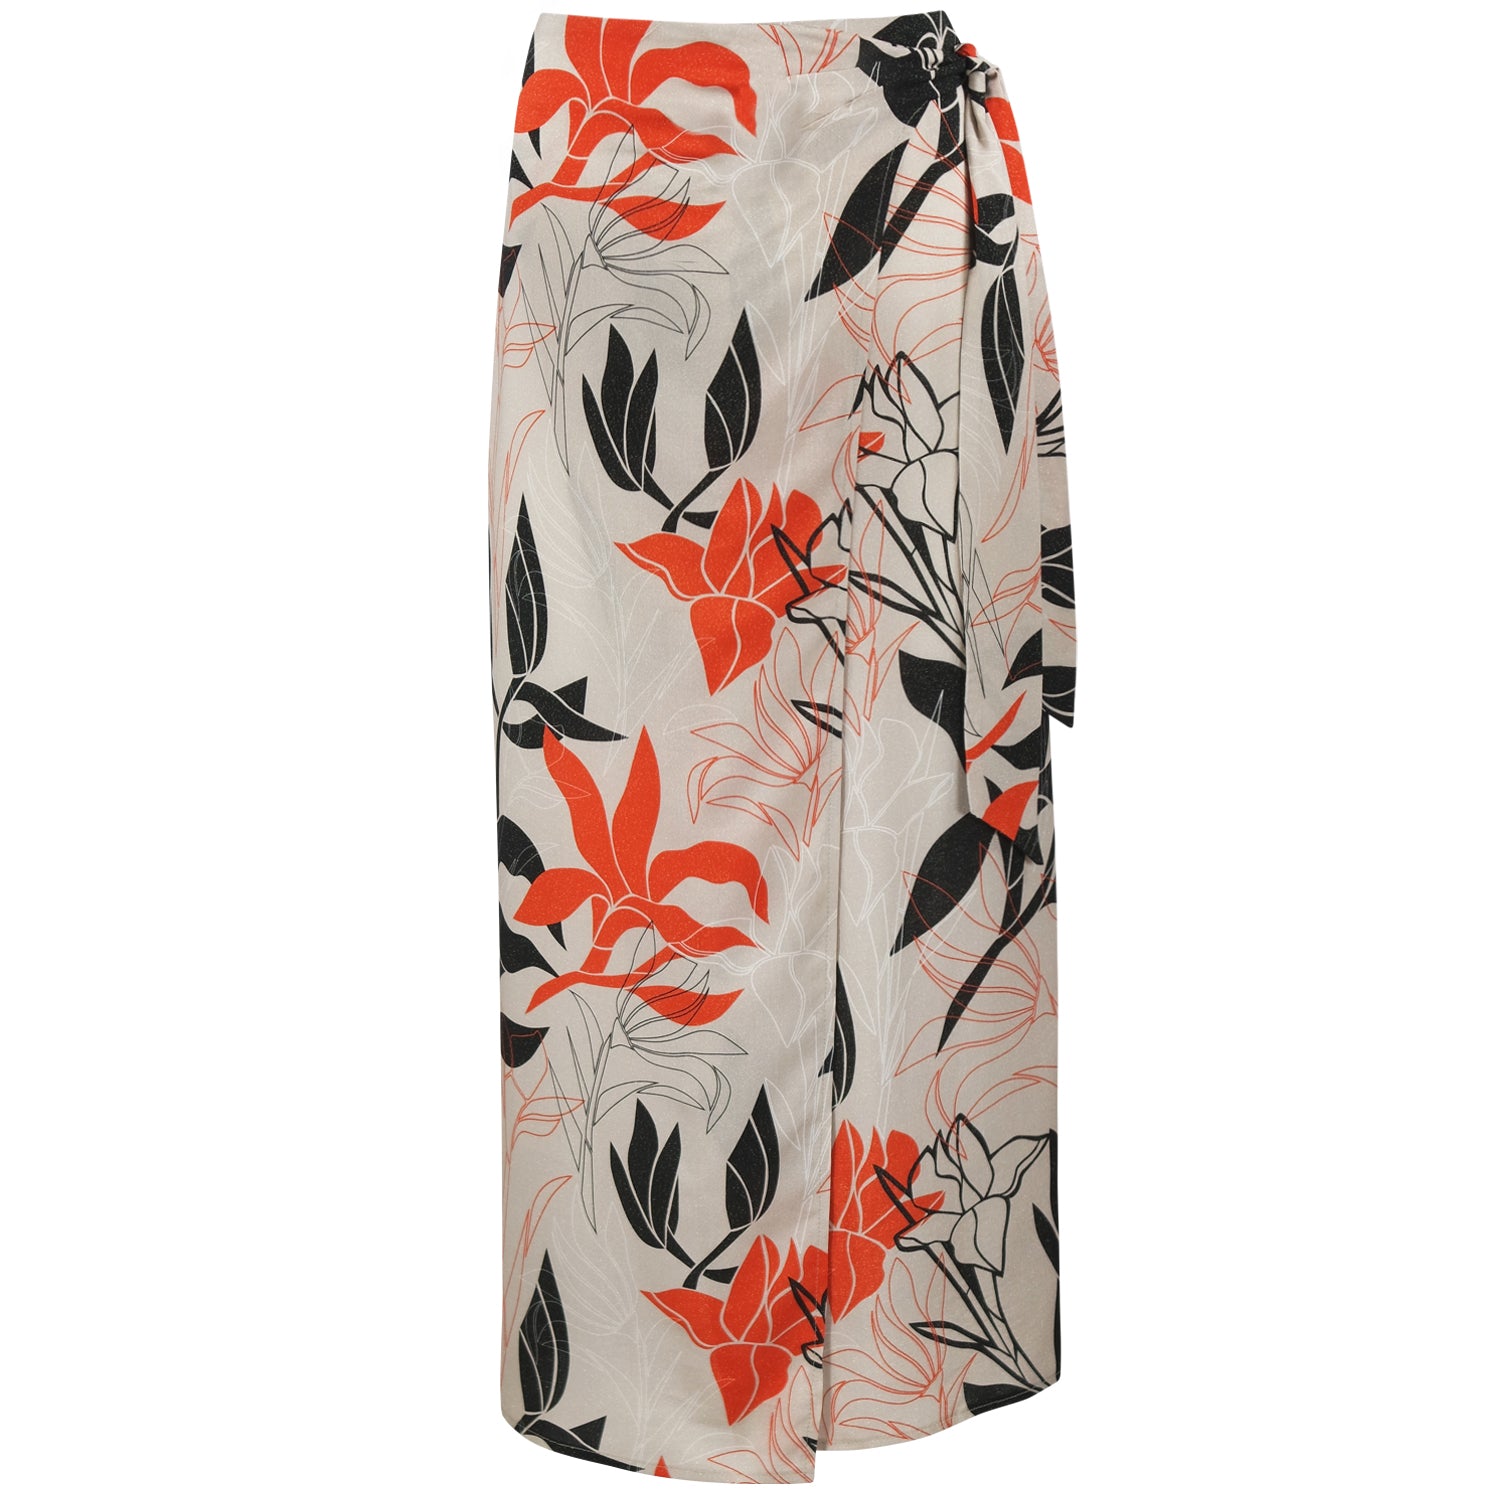 Hit Home Red & Taupe Print Wrap Tie Skirt by Me&Thee